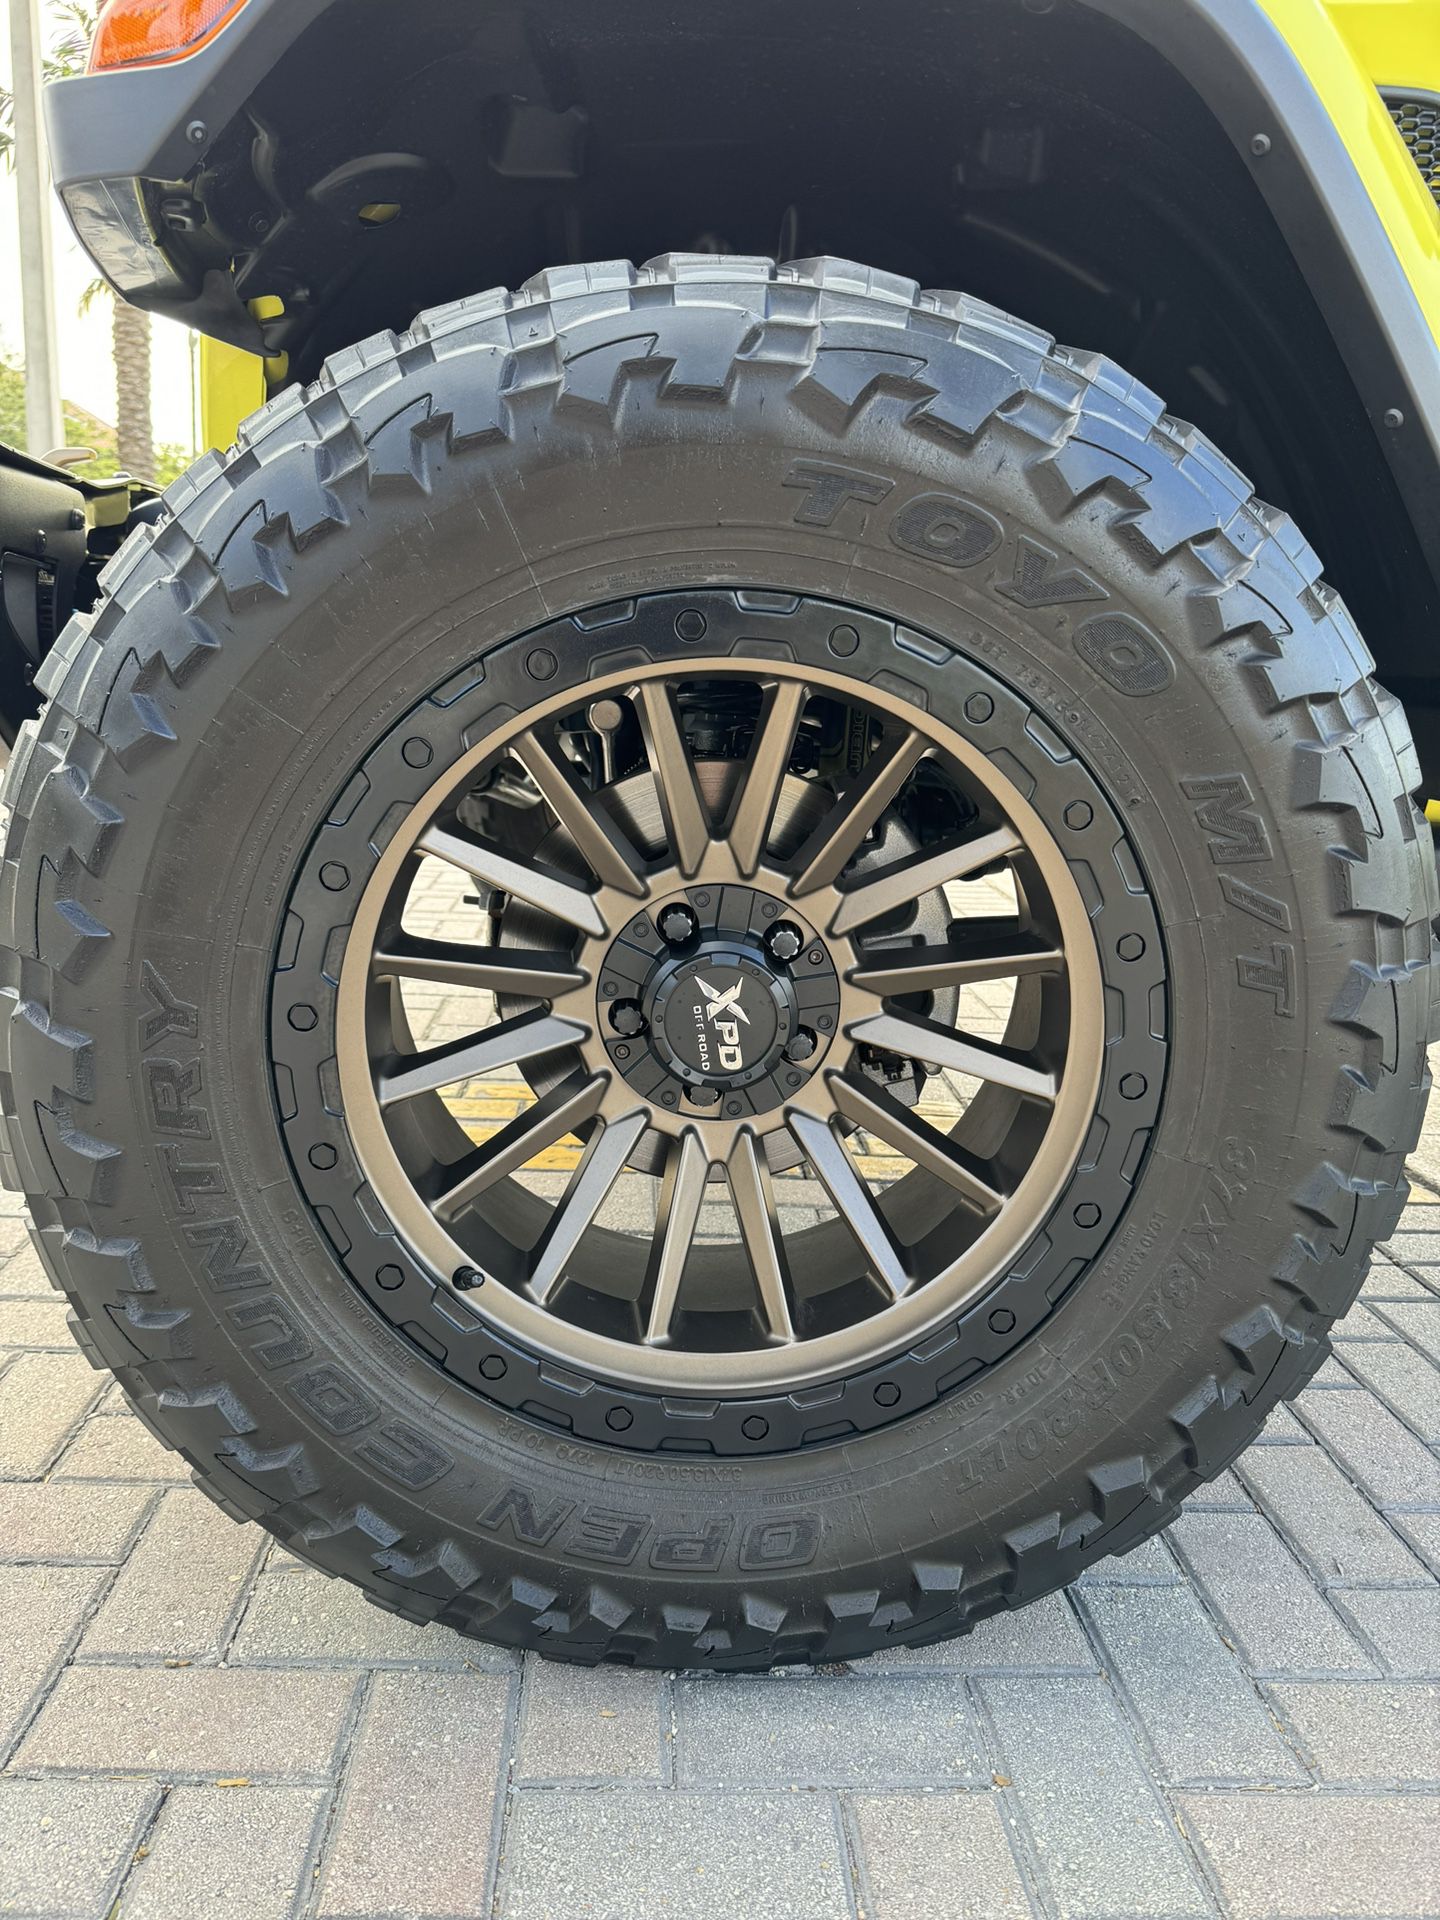 Xpd Off-road Wheels 20’s  with Toyo M/T  🛞 Open  Country 37x13 50r20 … for Jeep Gladiator & Wrangler & Rubicon